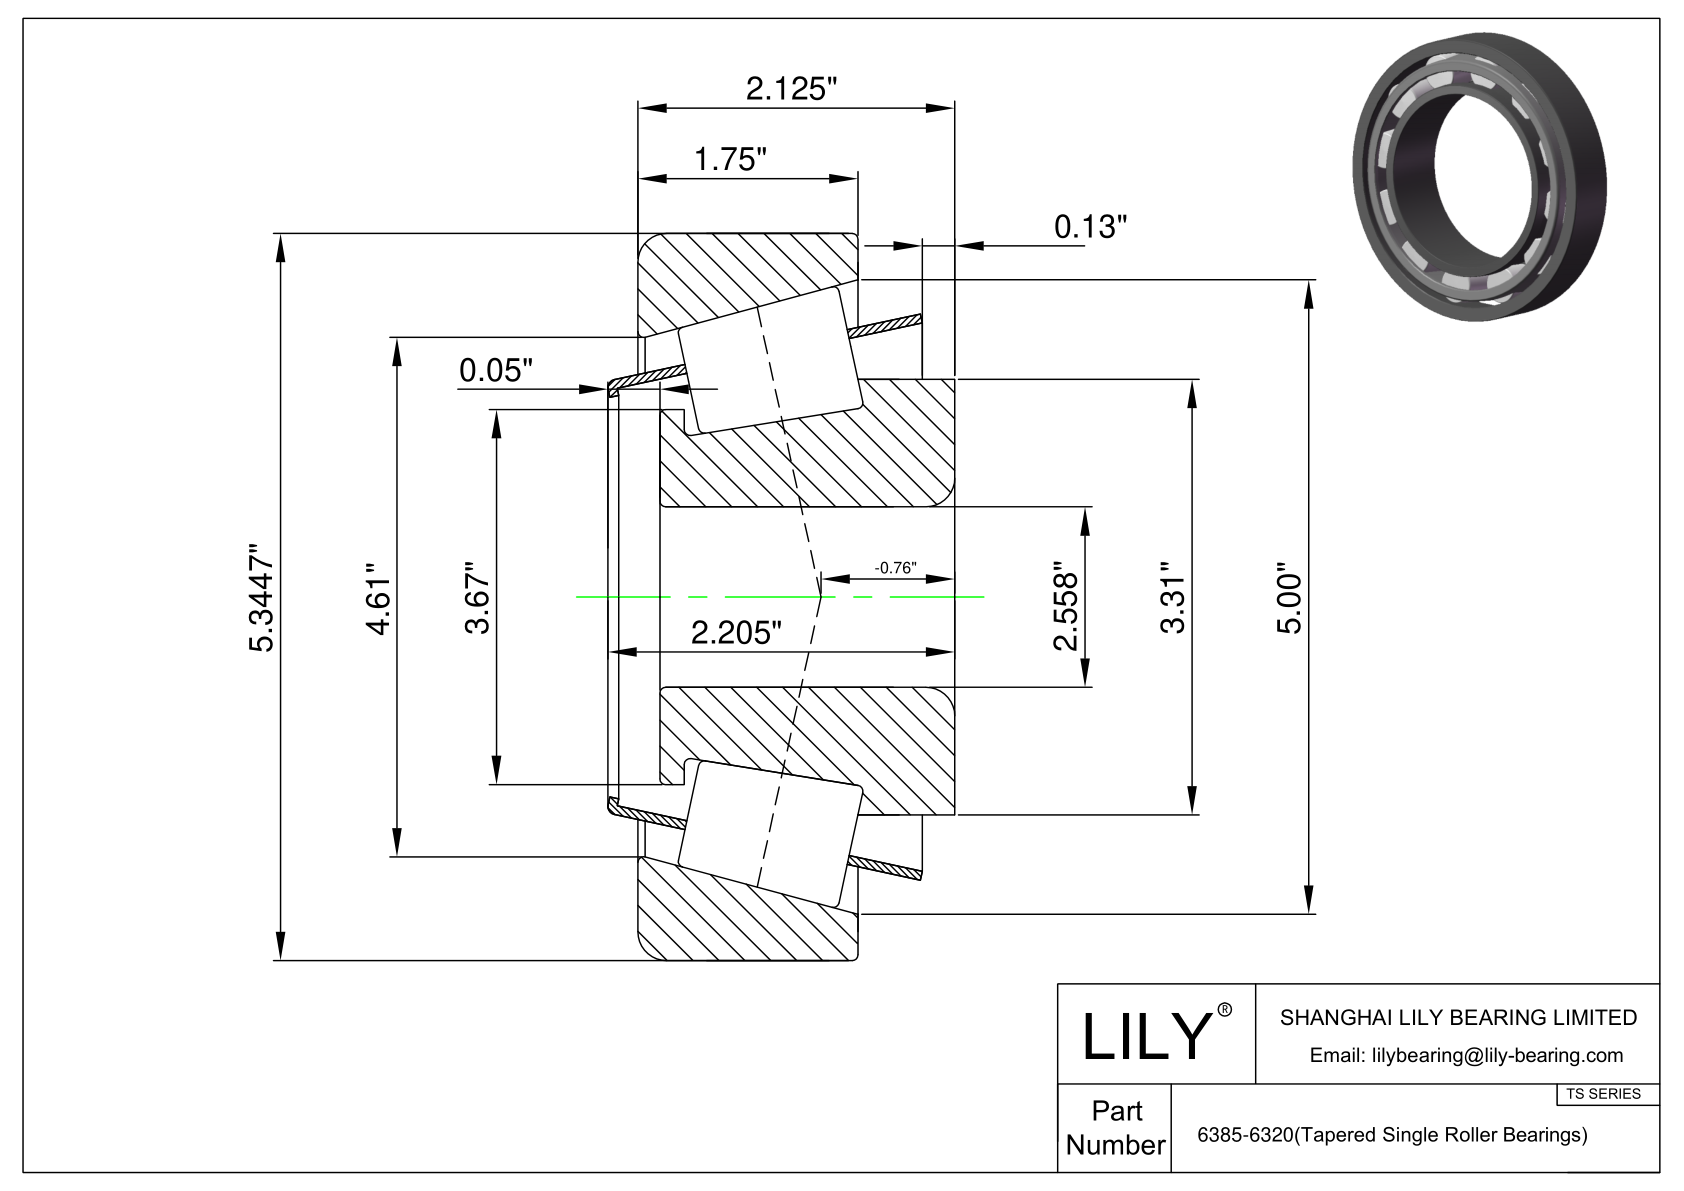 6385-6320 TS (Tapered Single Roller Bearings) (Imperial) cad drawing